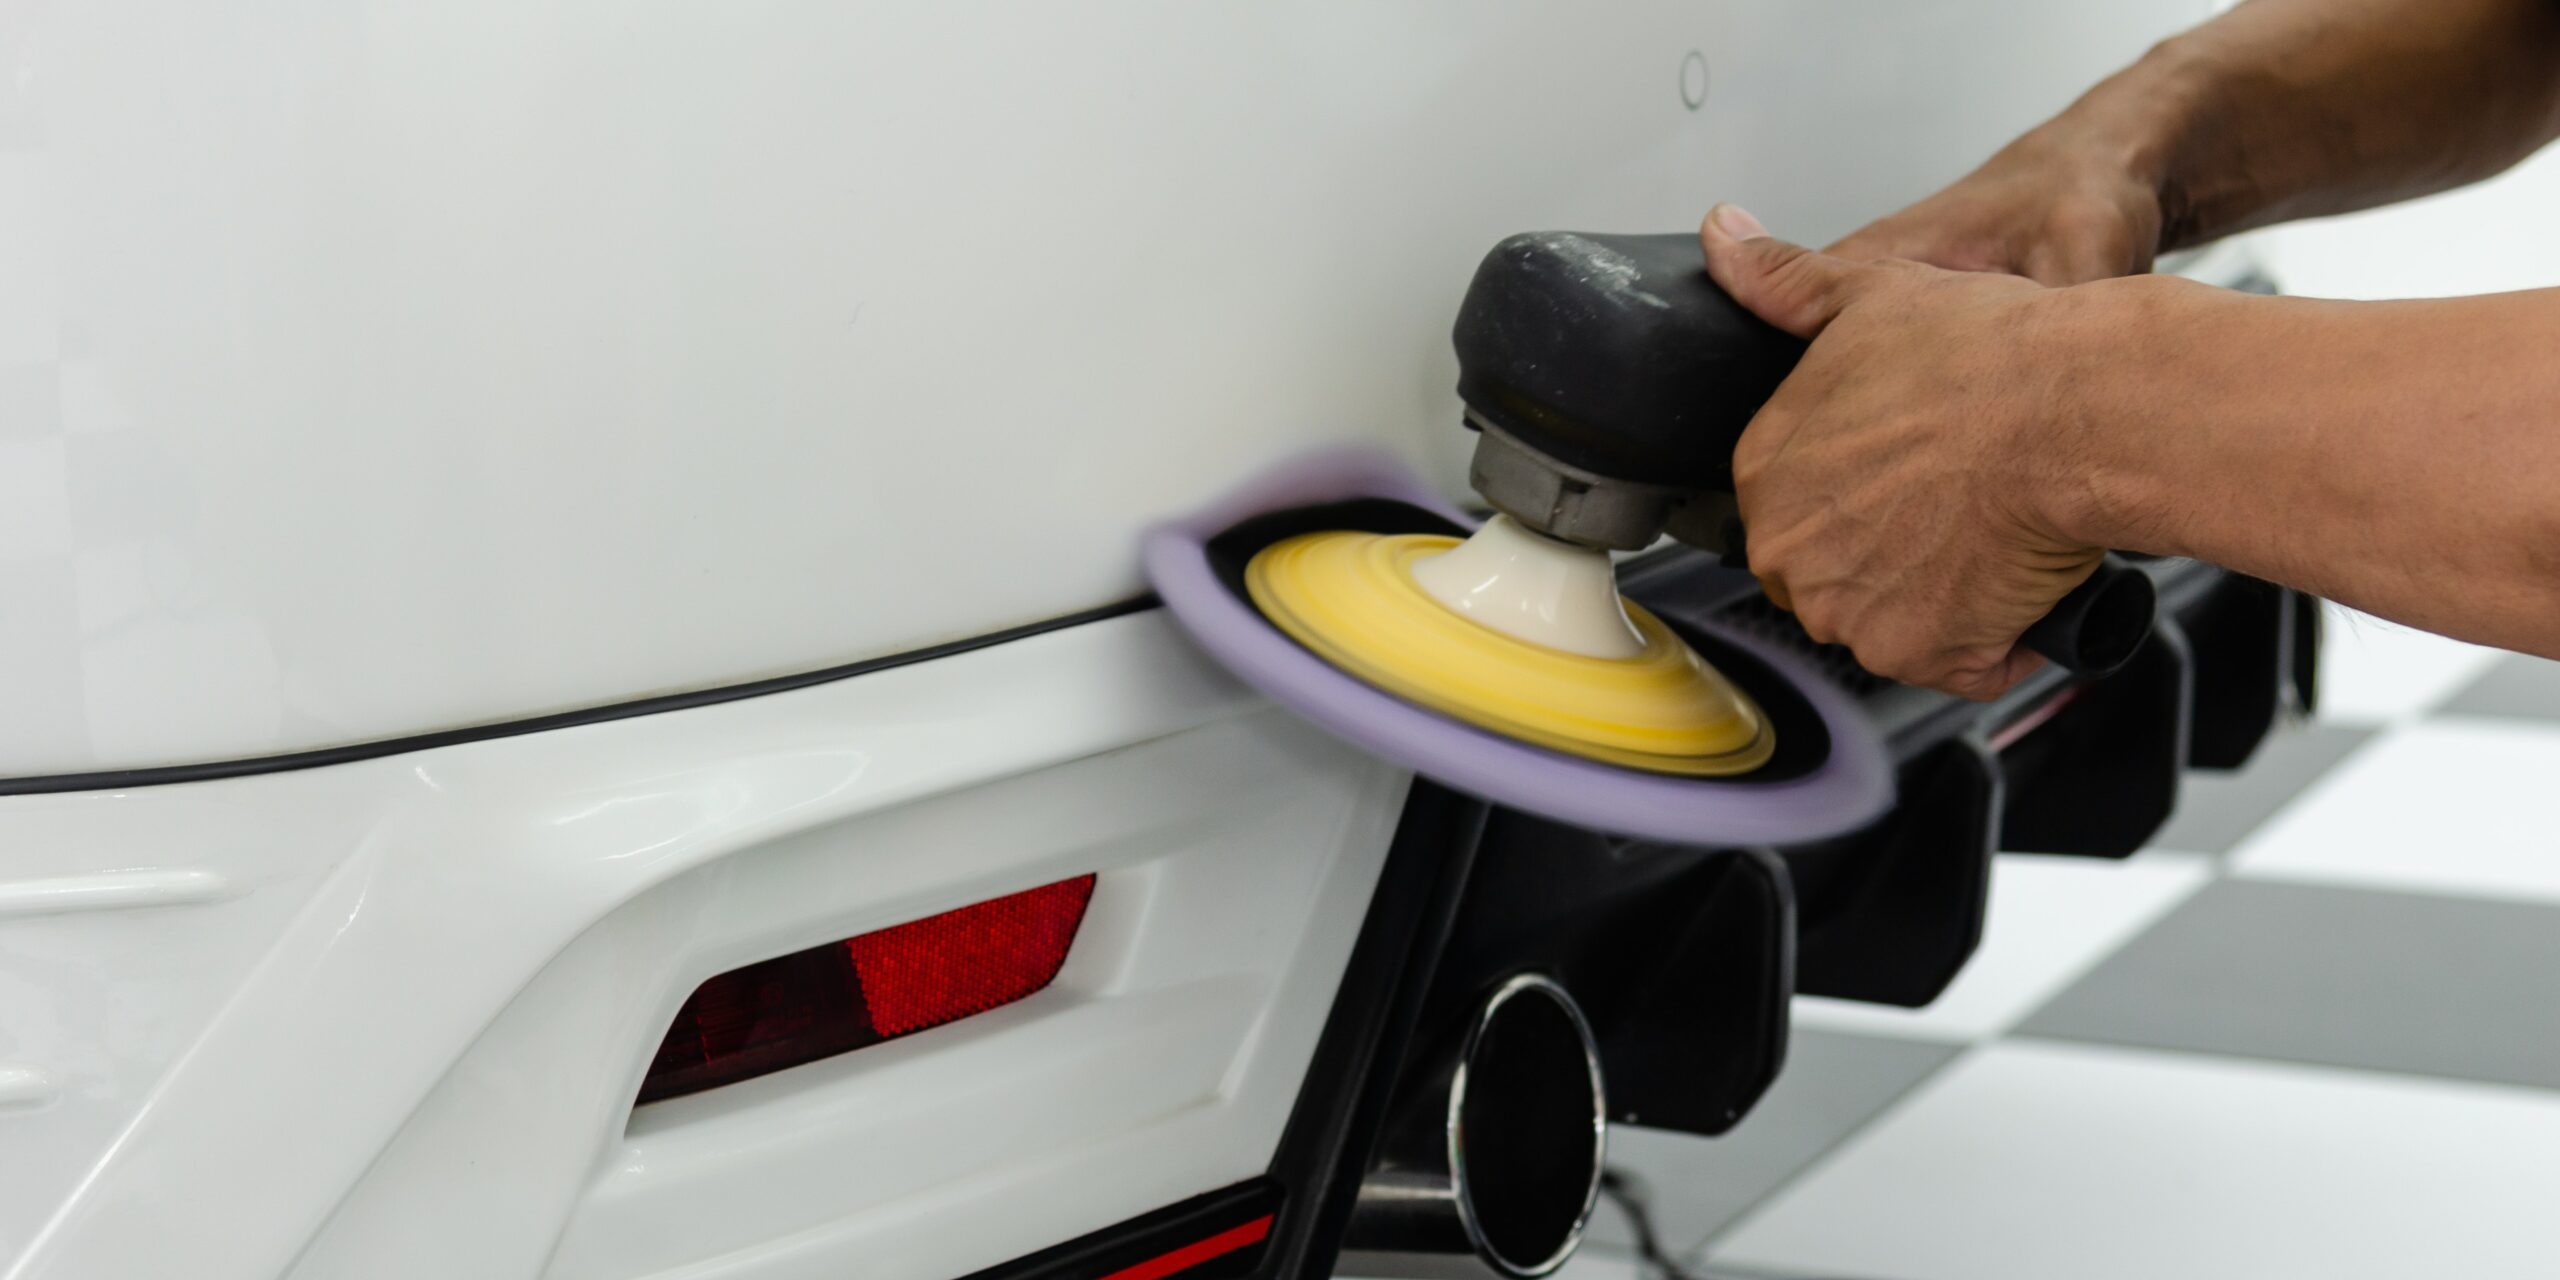 How to get scuff marks off car